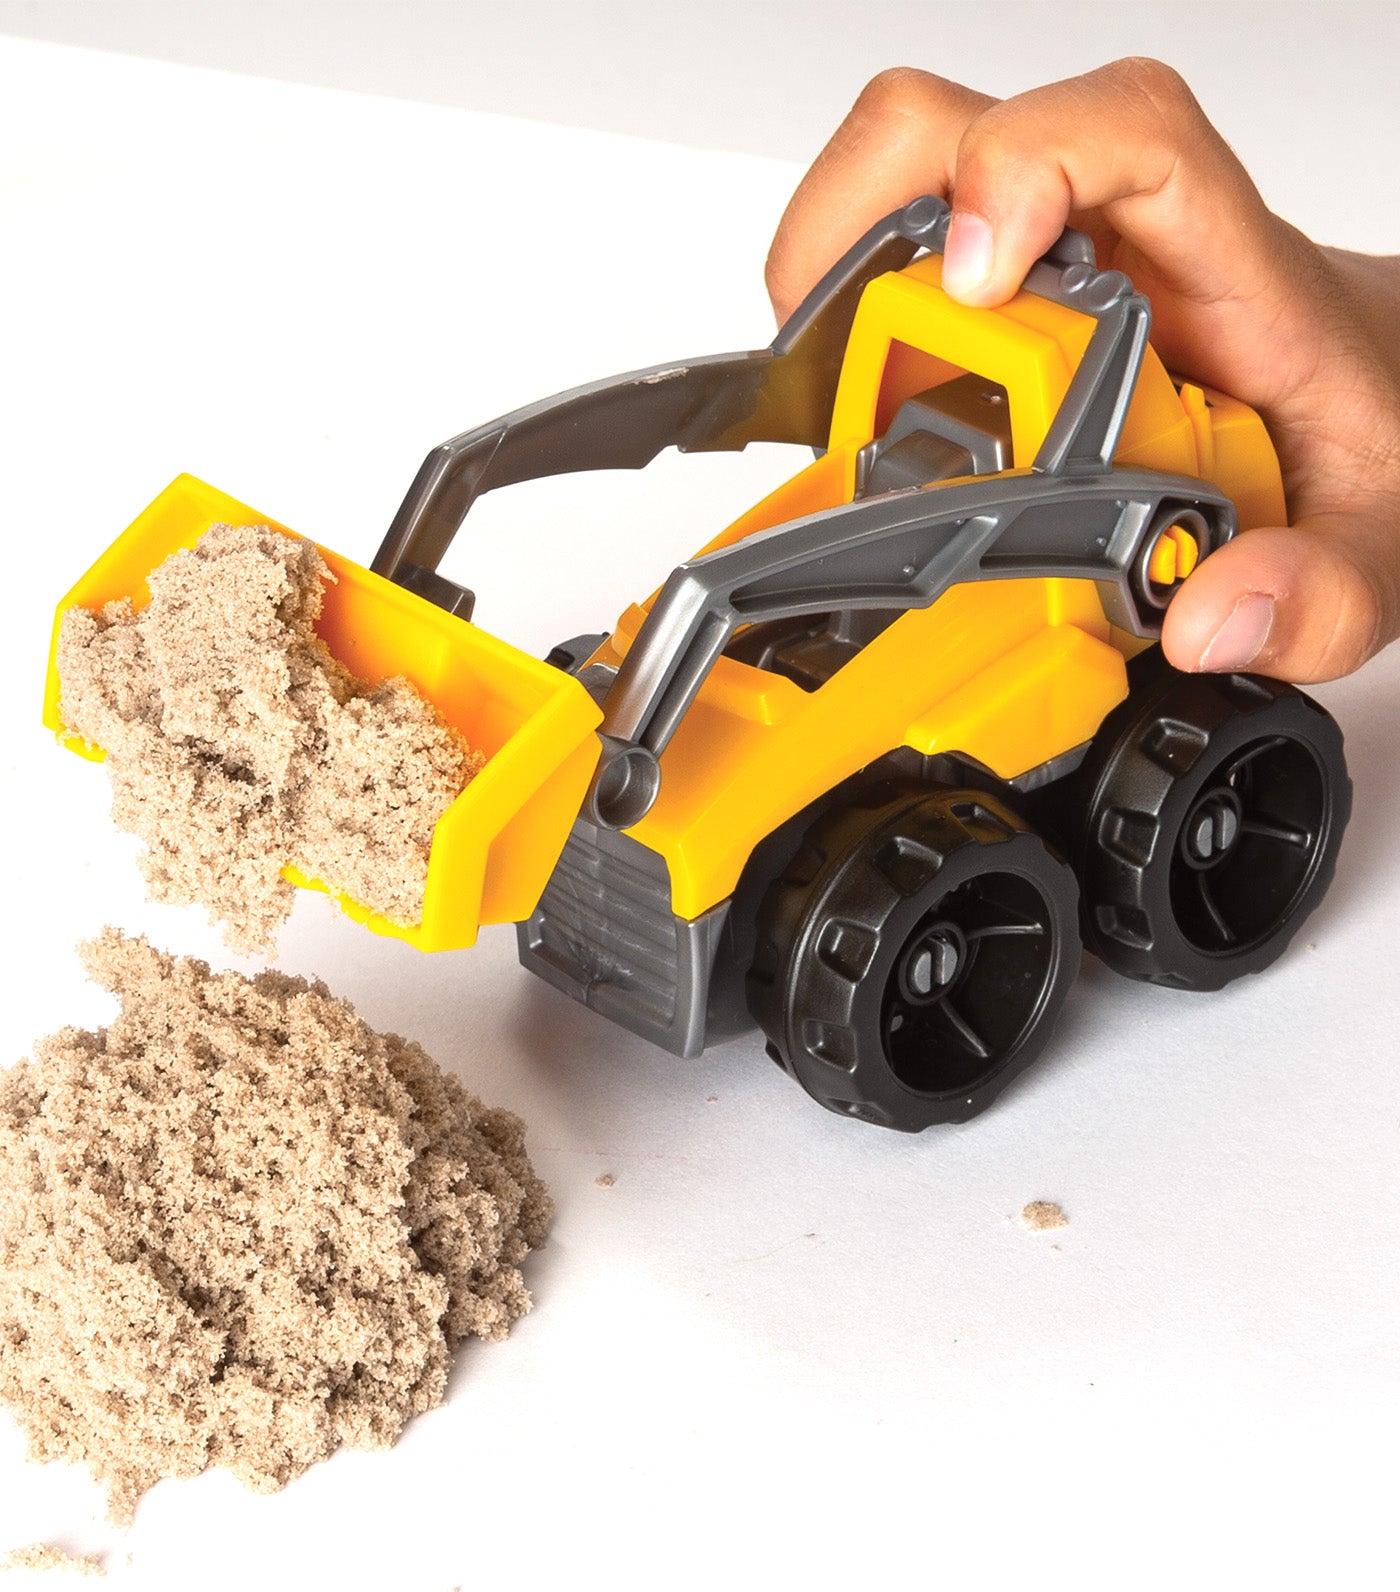 Kinetic Sand, Pave & Play Construction Set With Vehicle And 8oz Black Kinetic  Sand, For Kids Aged 3 And Up, Toys, Games & More